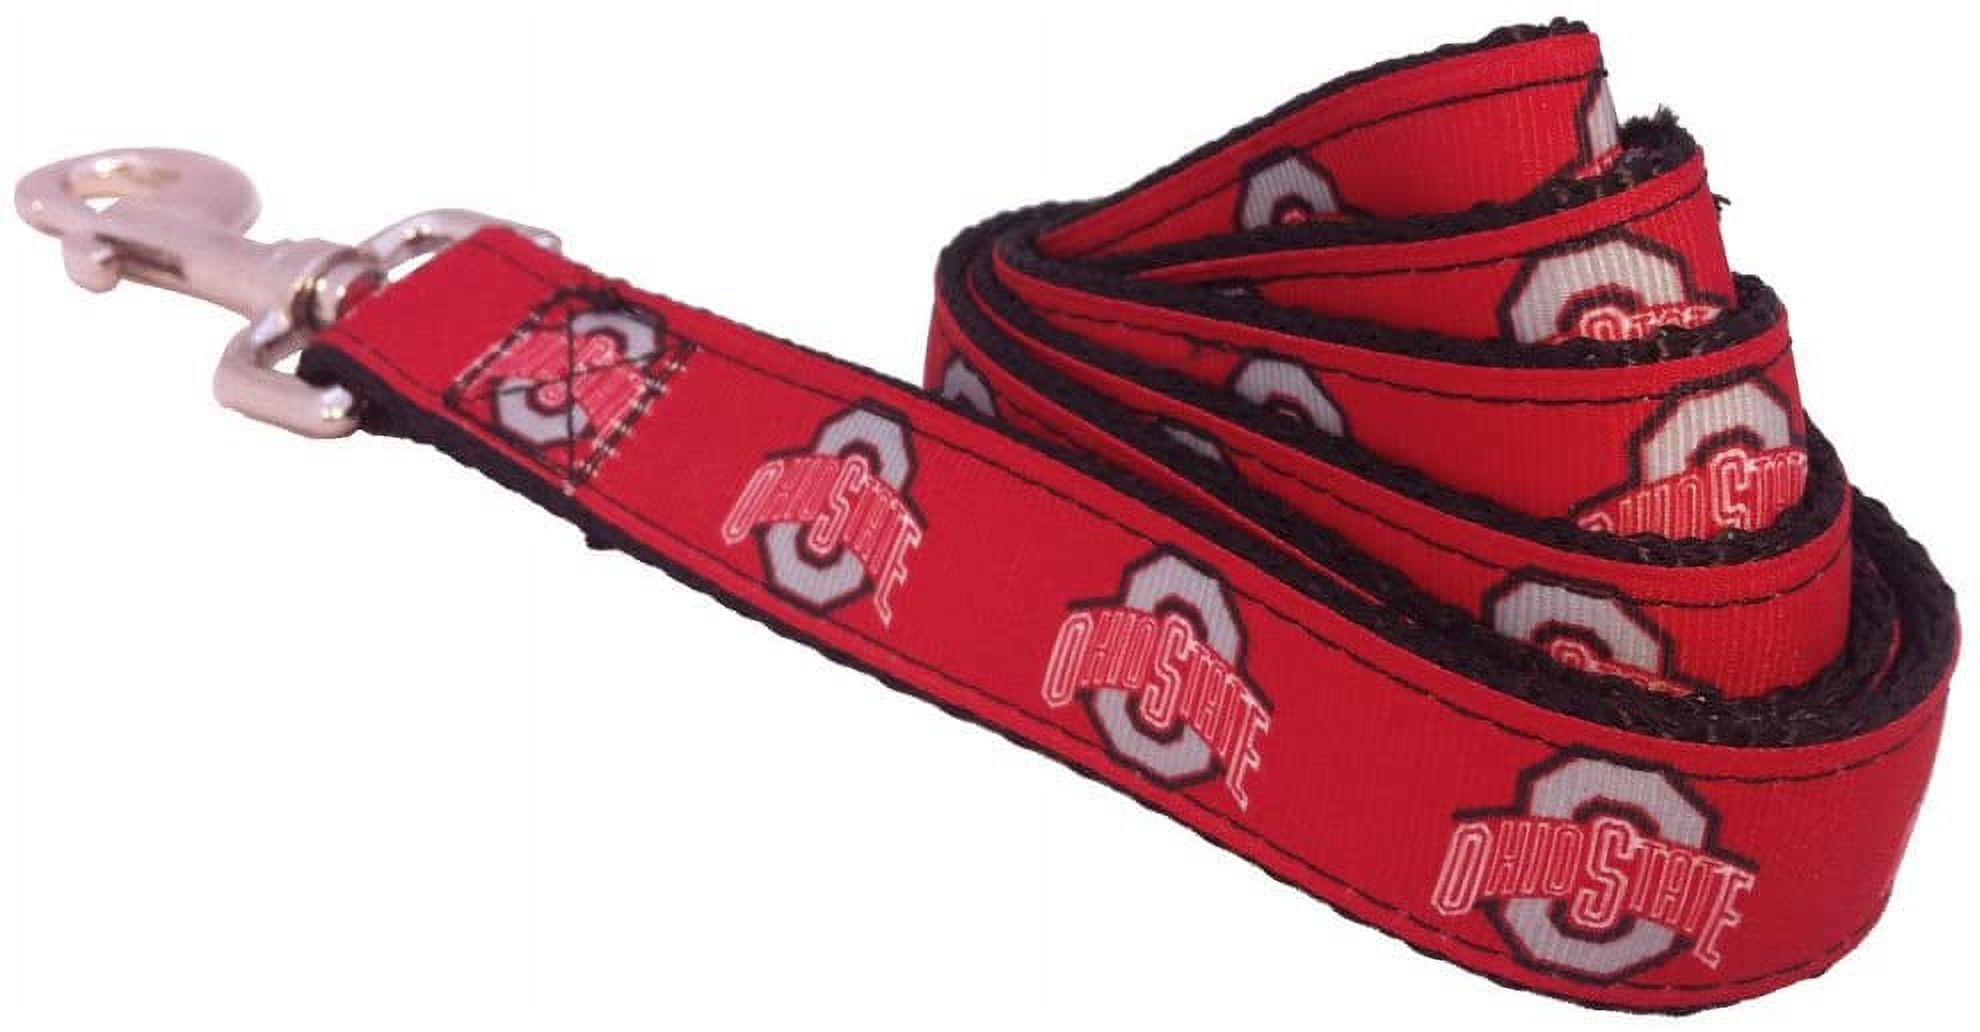 Brand New Ohio/State Small Pet Dog Collar(1 Inch Wide, 8-14 Inch Long), and Small Leash(5/8 Inch Wide, 6 Feet Long) Bundle, Official Team Logo/Red Color - image 2 of 3